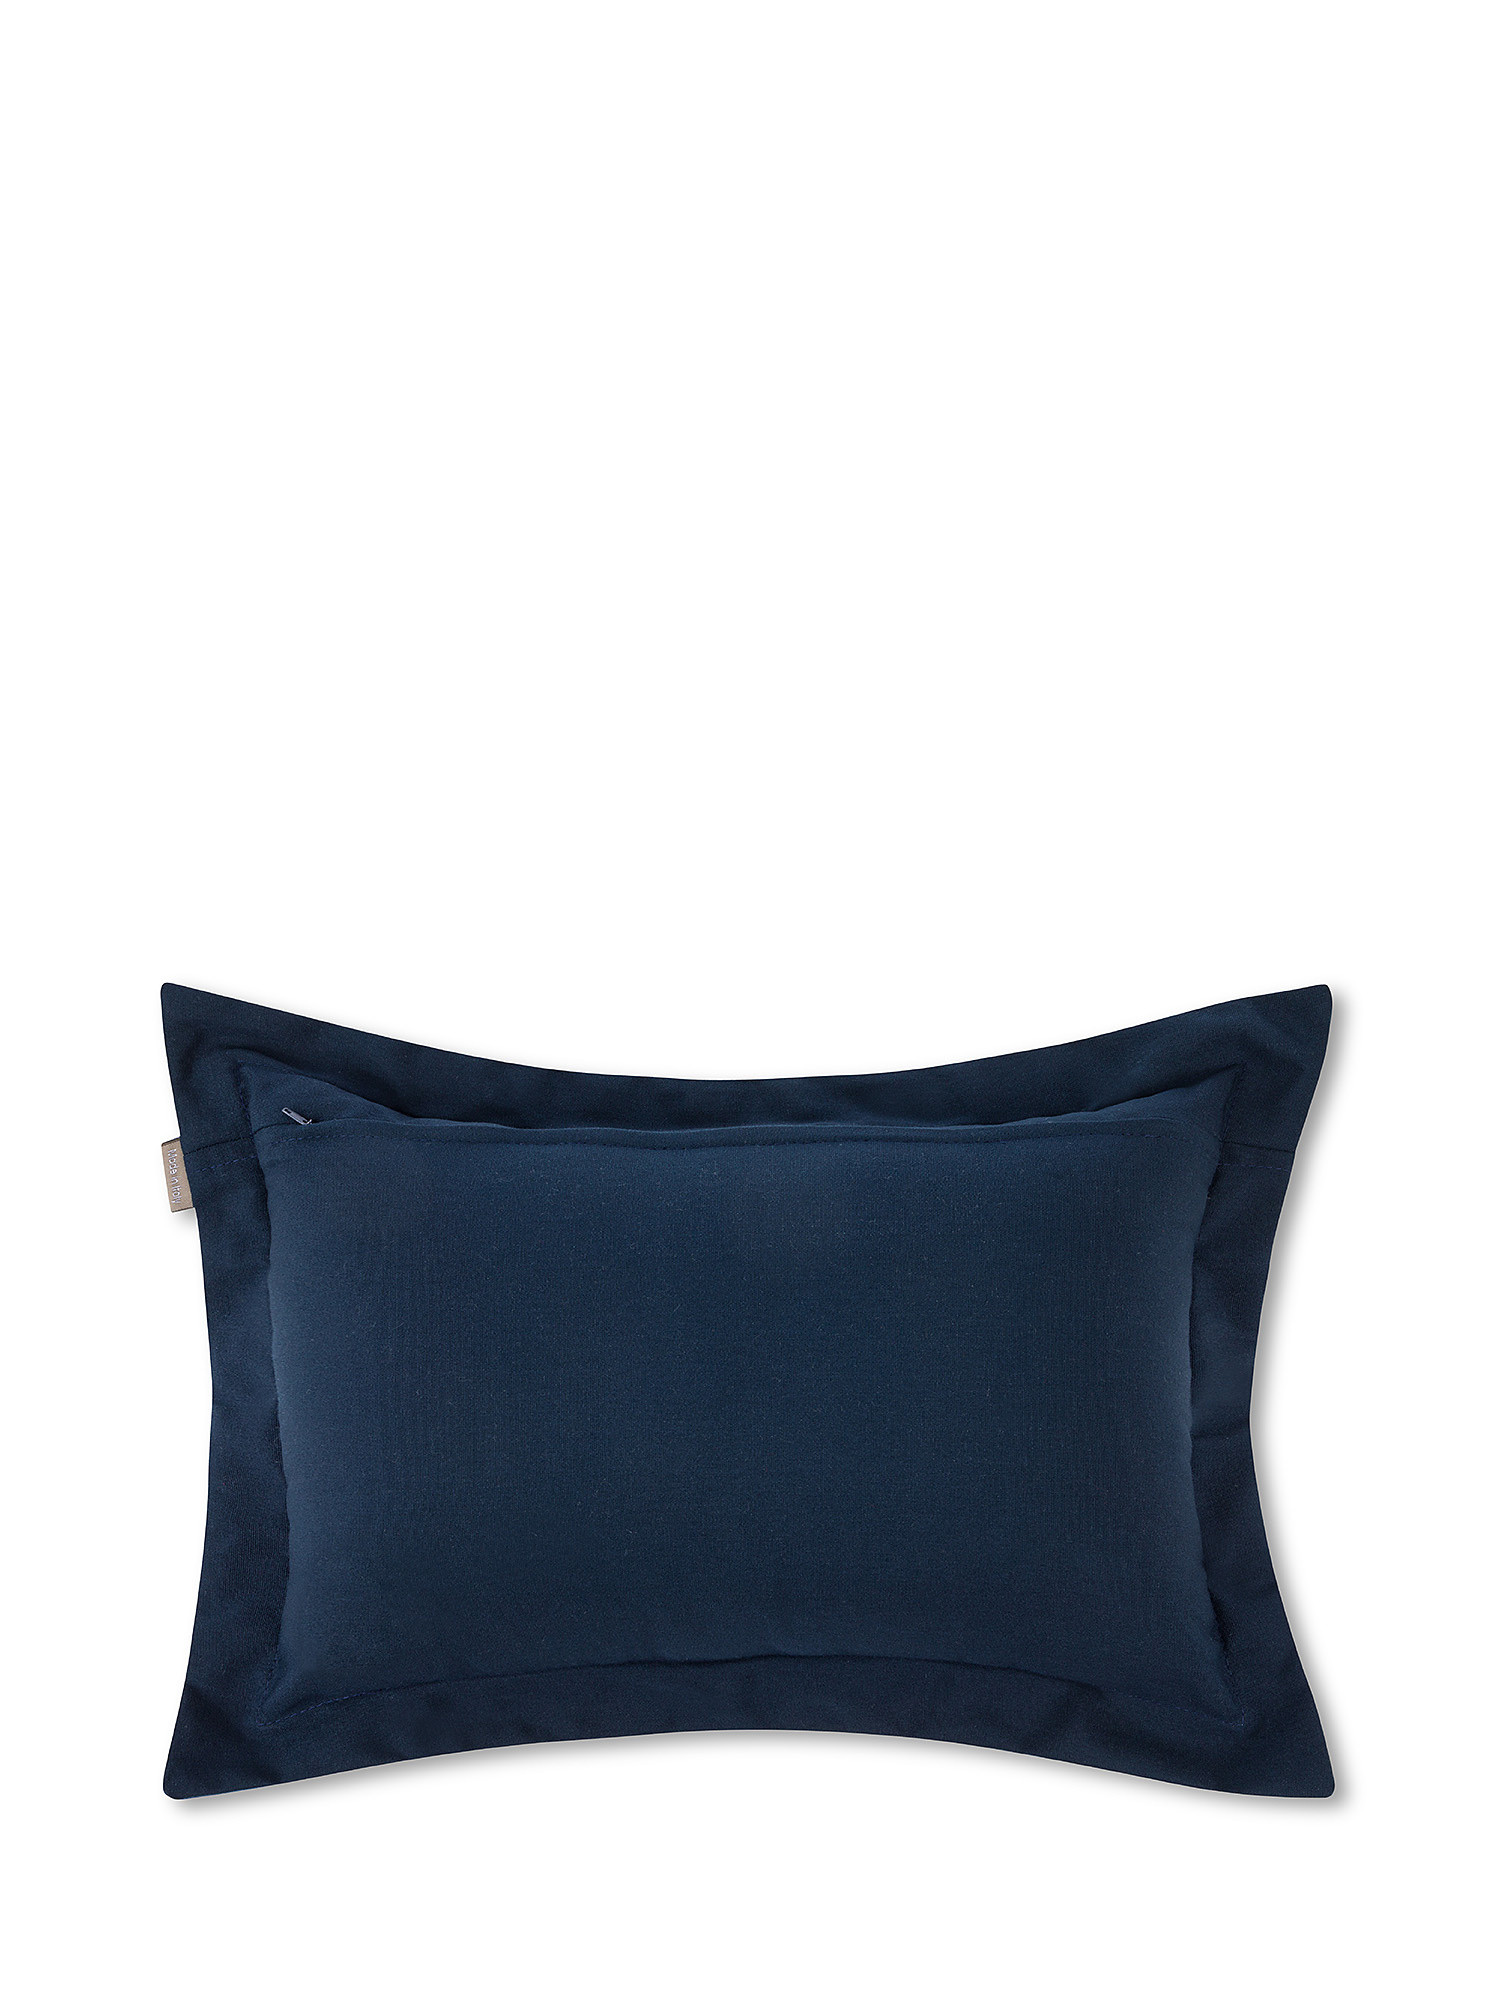 Outdoor cushion in double color fabric 30x50cm, Blue, large image number 1